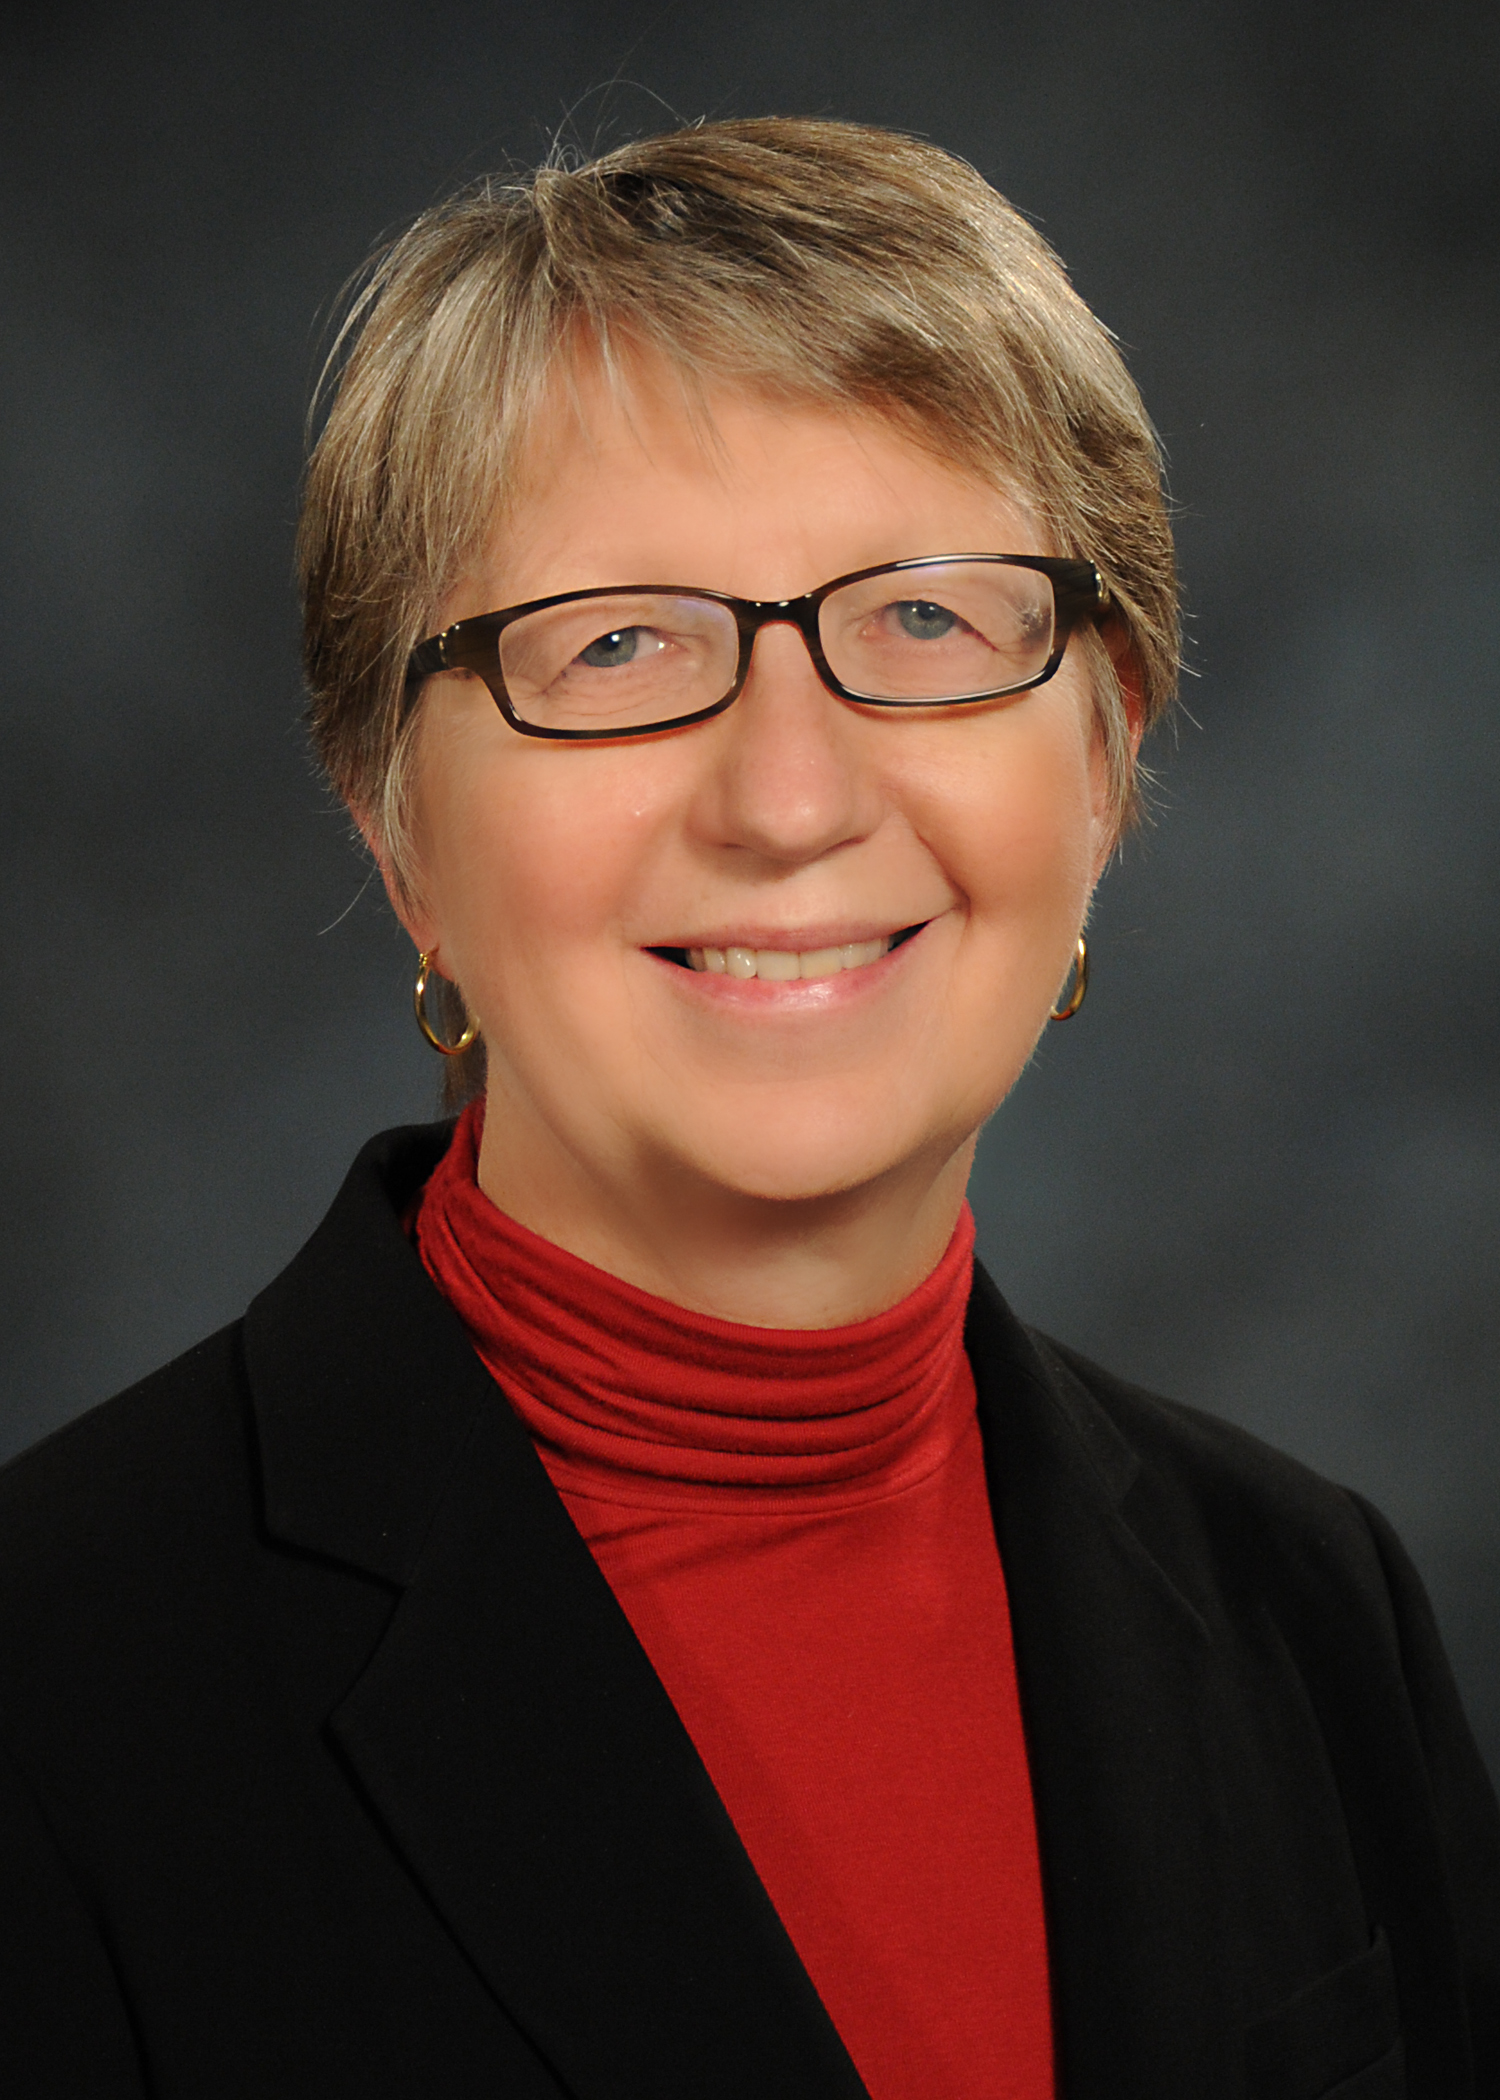 Professor receives Article of the Year distinction from Public Health Nursing journal